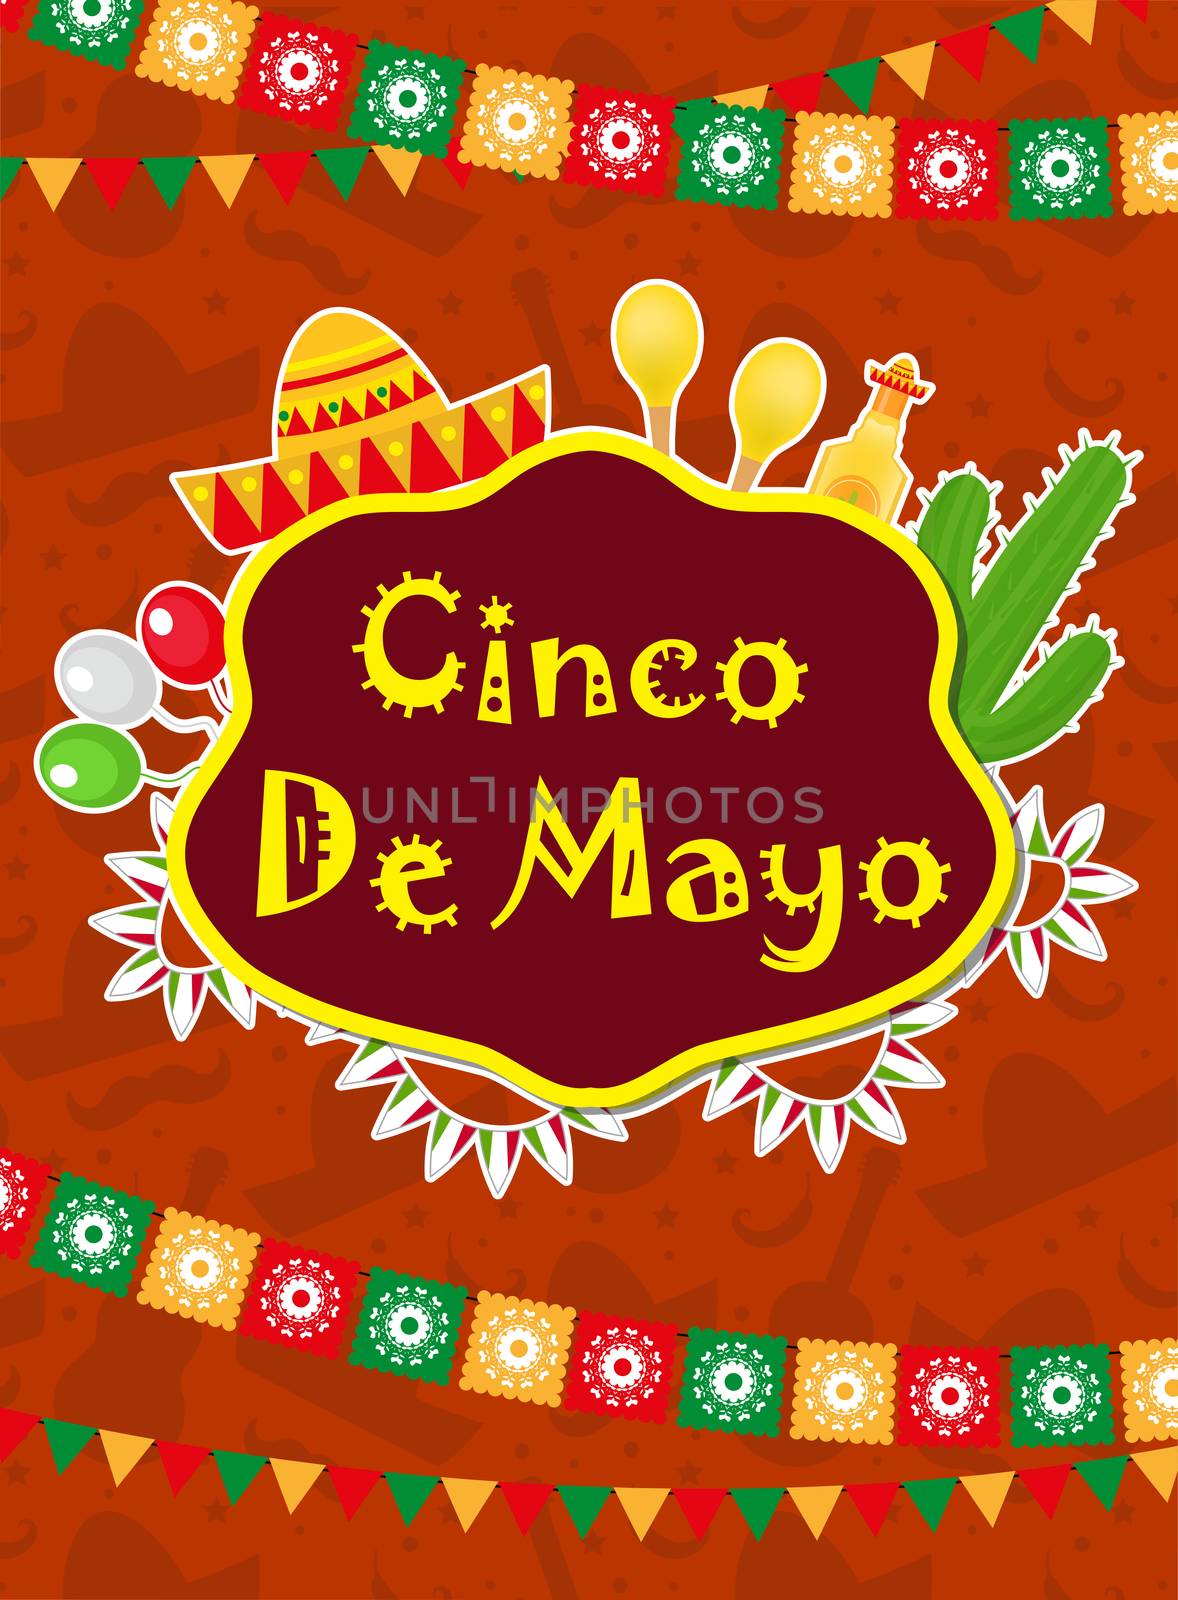 Cinco de Mayo greeting card, template for flyer, poster, invitation. Mexican celebration with traditional symbols. illustration. by lucia_fox